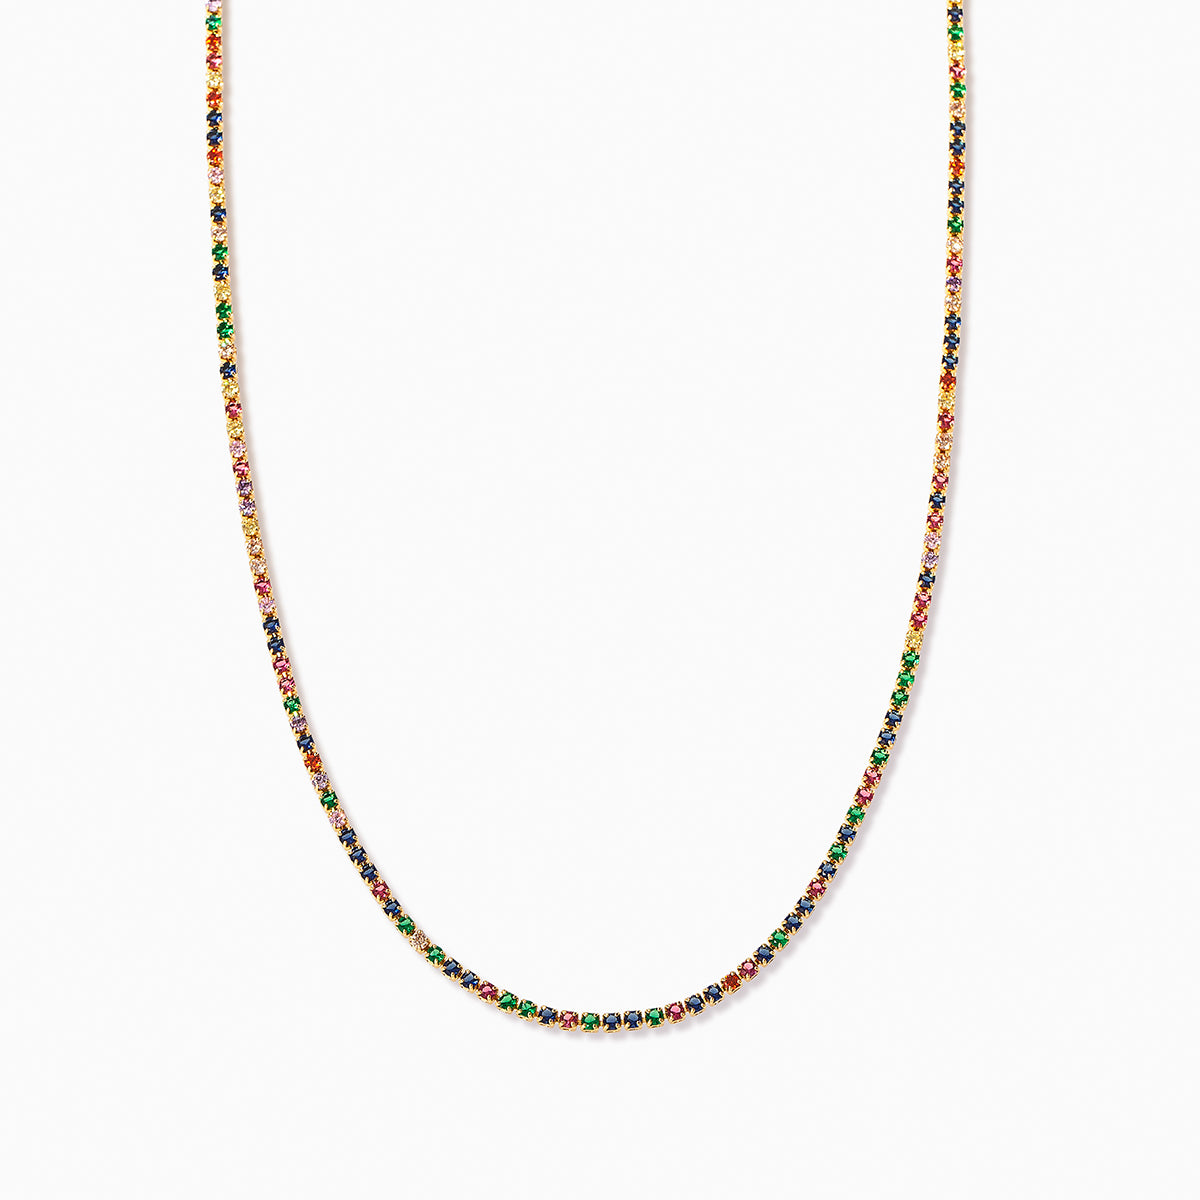 Colorful Studded Necklace | Gold | Product Image | Uncommon James